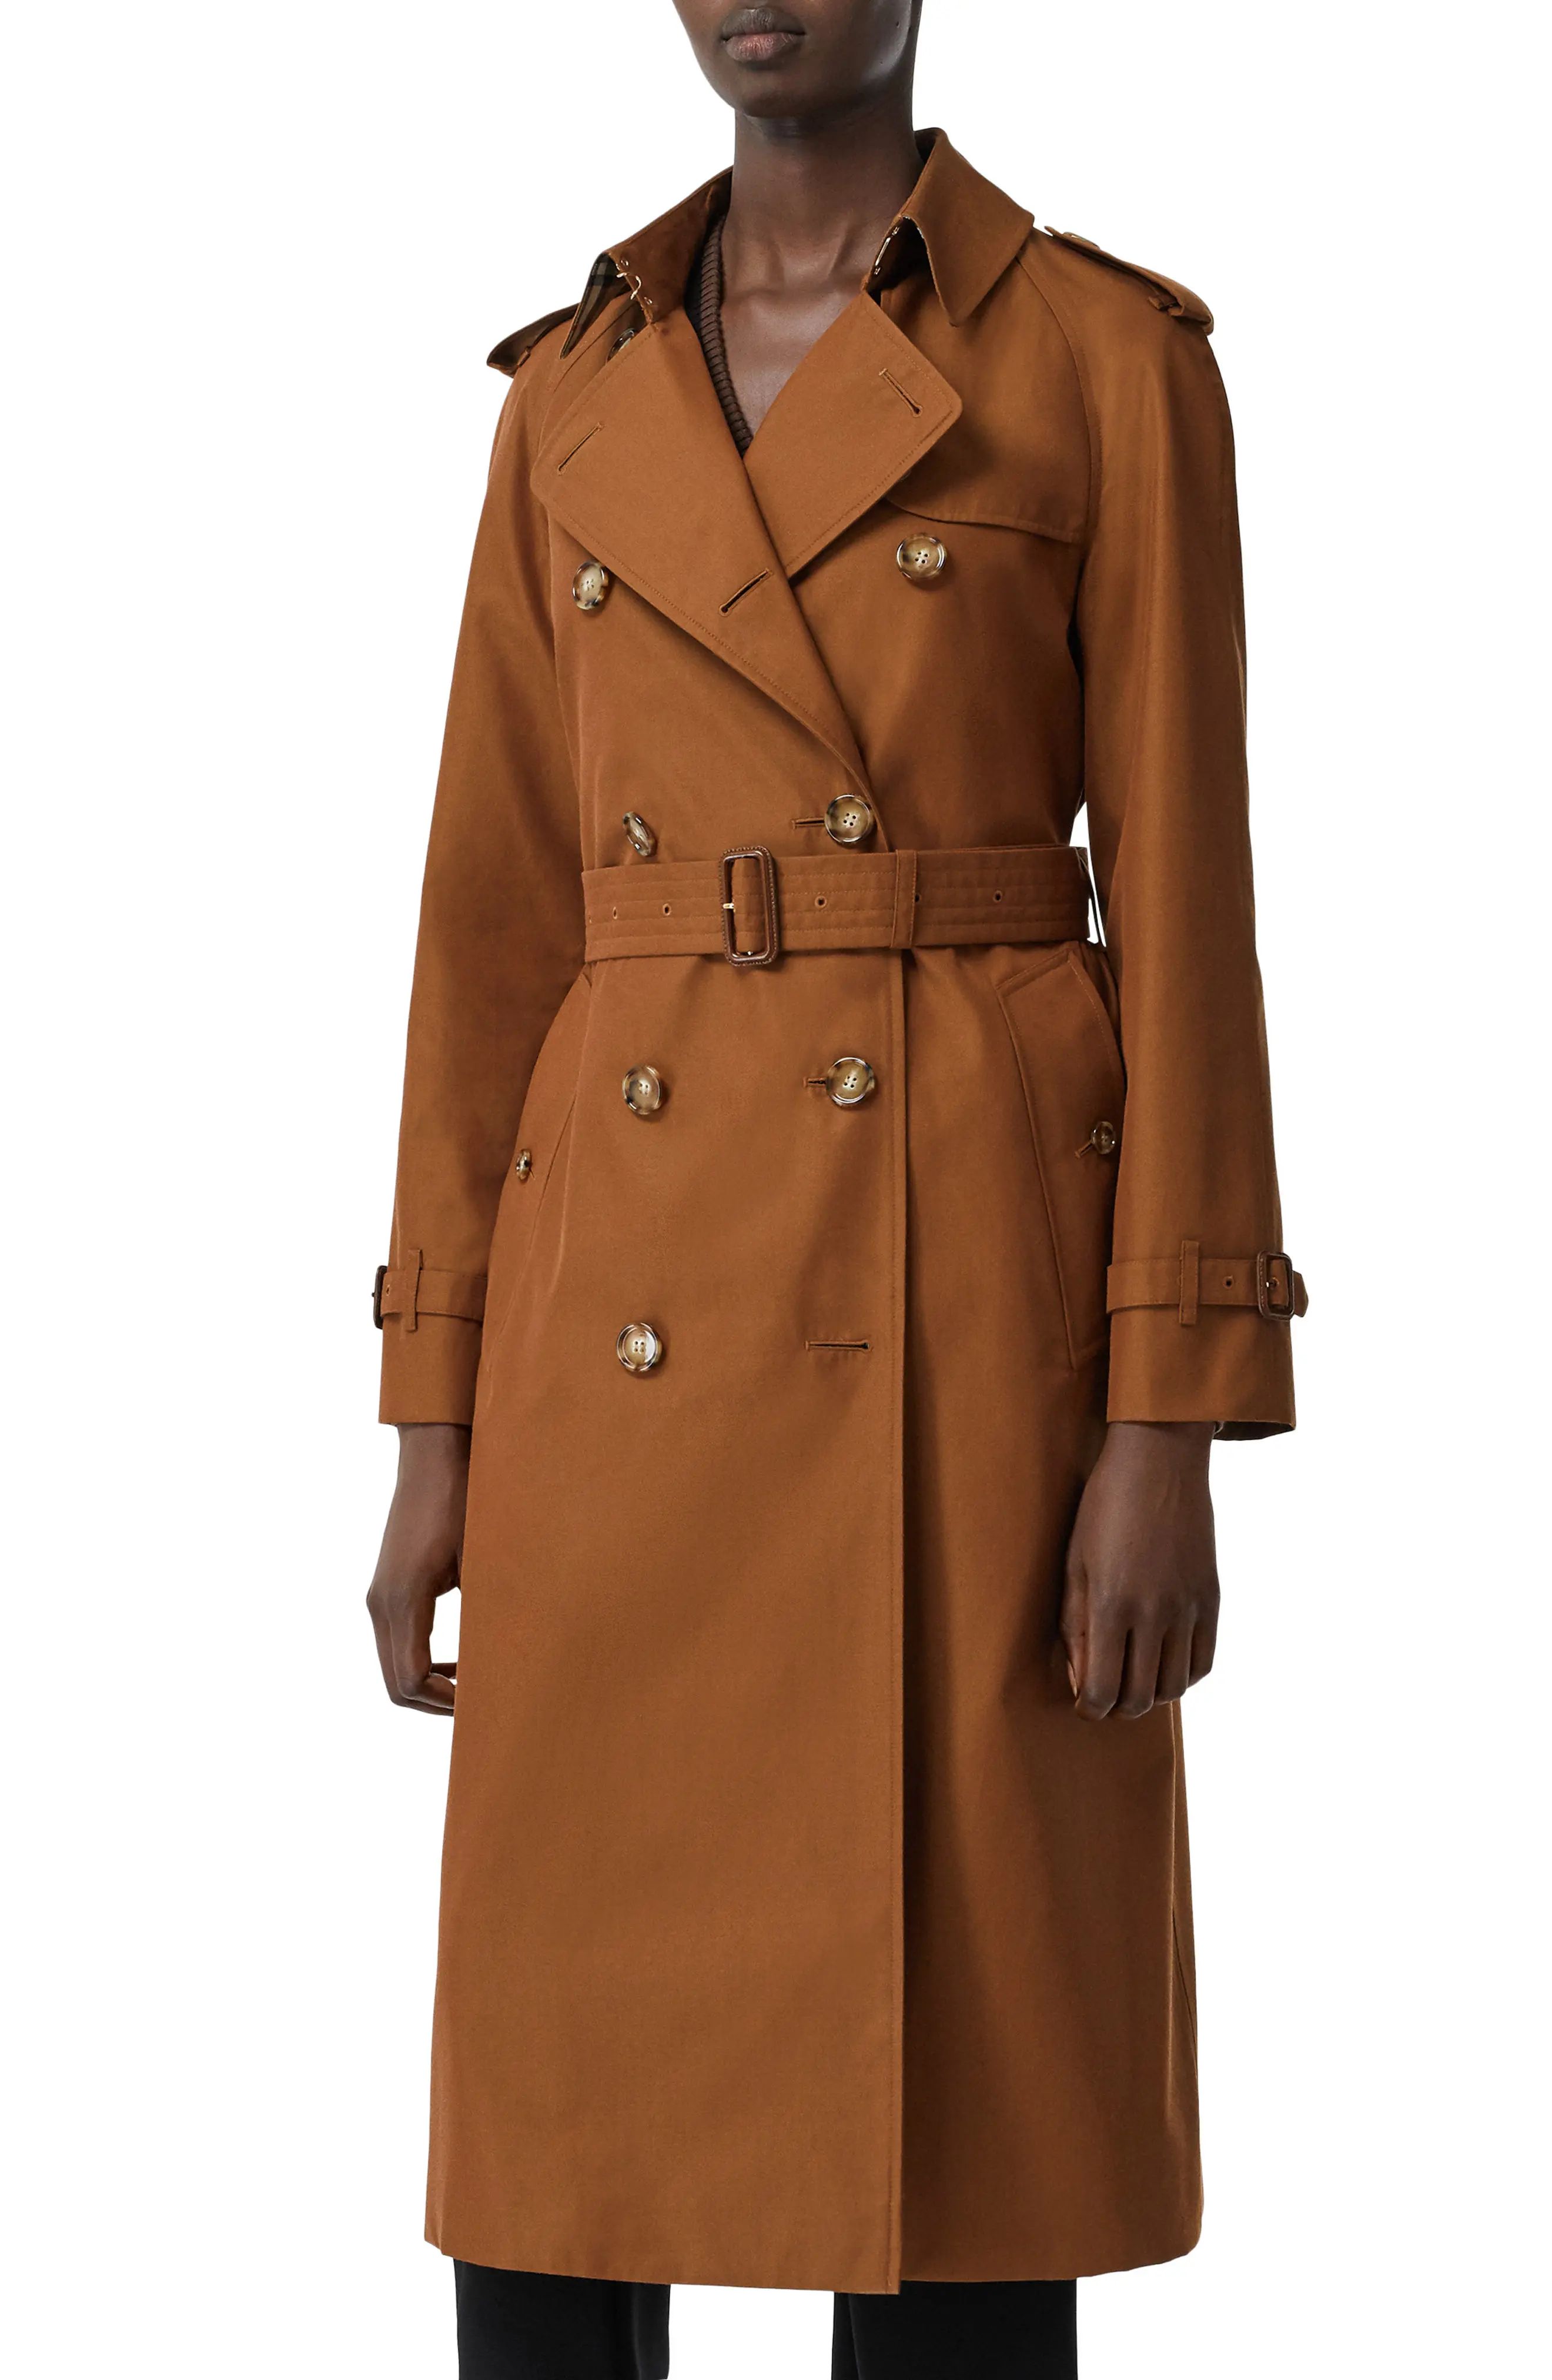 Women's Burberry Waterloo Relaxed Fit Cotton Trench Coat, Size 0 - Brown | Nordstrom